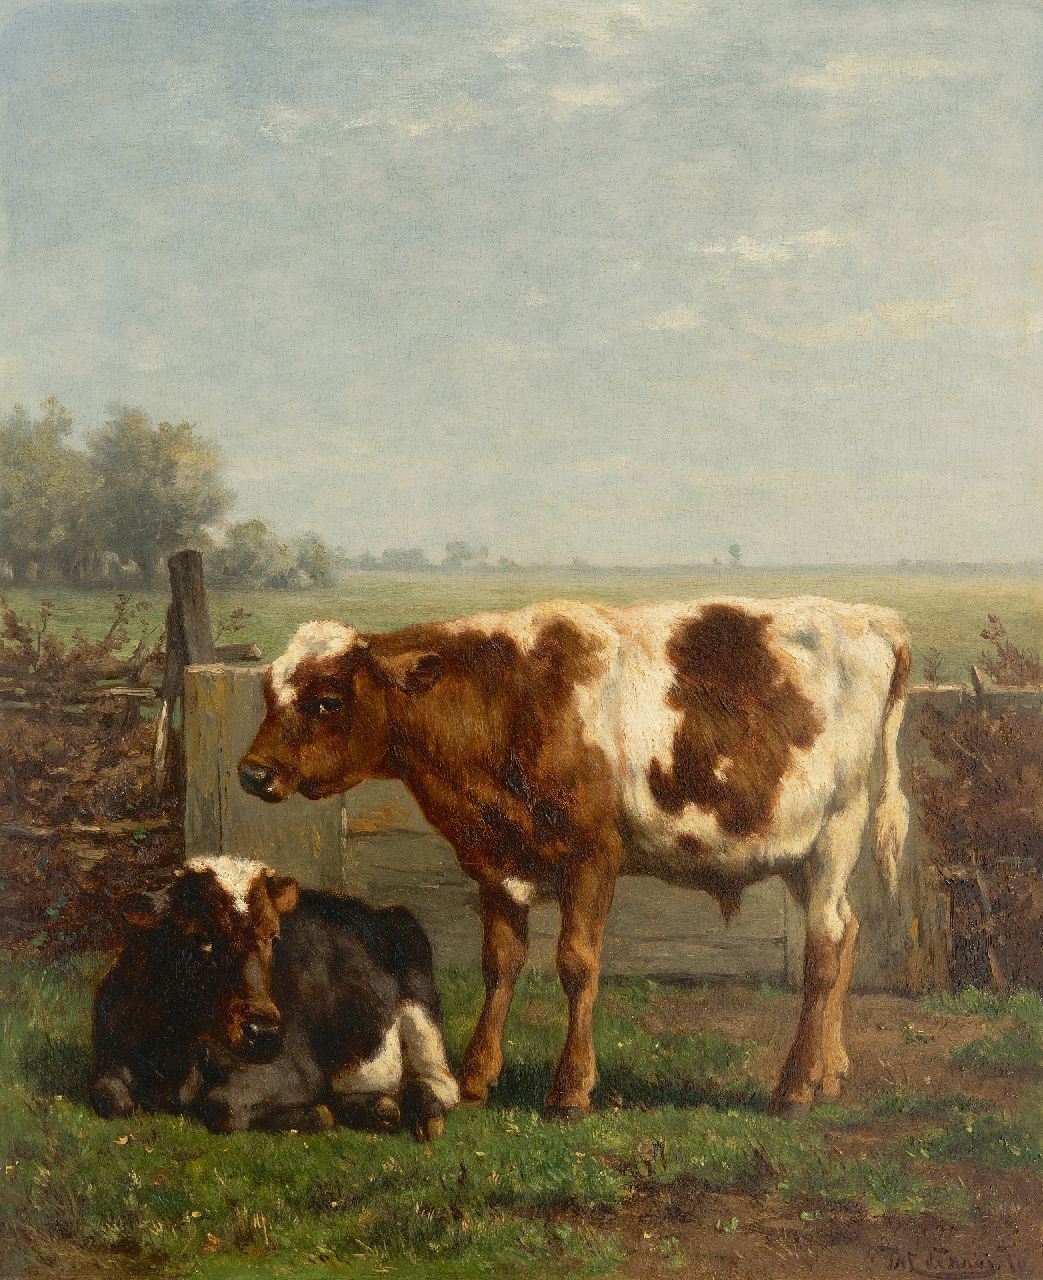 Haas J.H.L. de | Johannes Hubertus Leonardus de Haas | Paintings offered for sale | Two young cows by a fence, oil on panel 43.1 x 35.3 cm, signed l.r. and dated '70